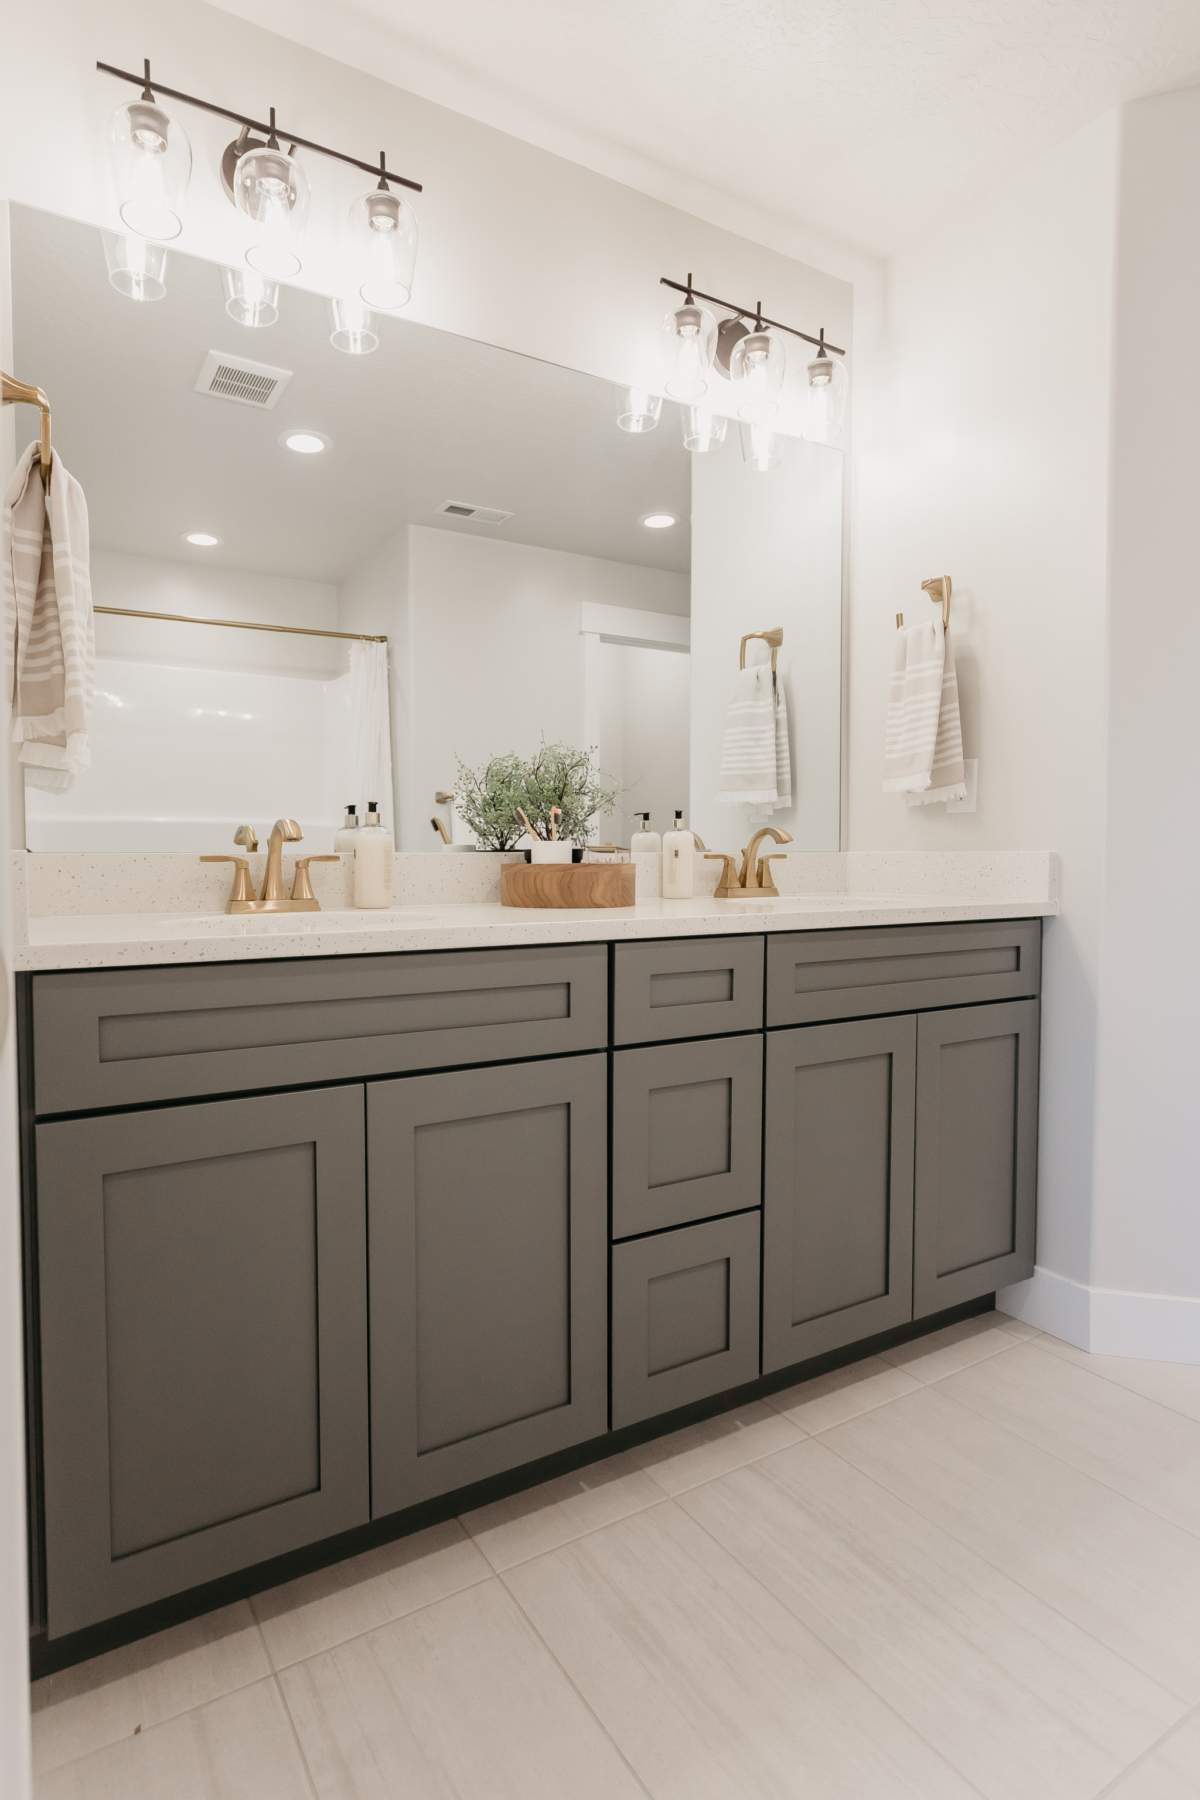 Townhome Primary Bathrooms - EDGEhomes